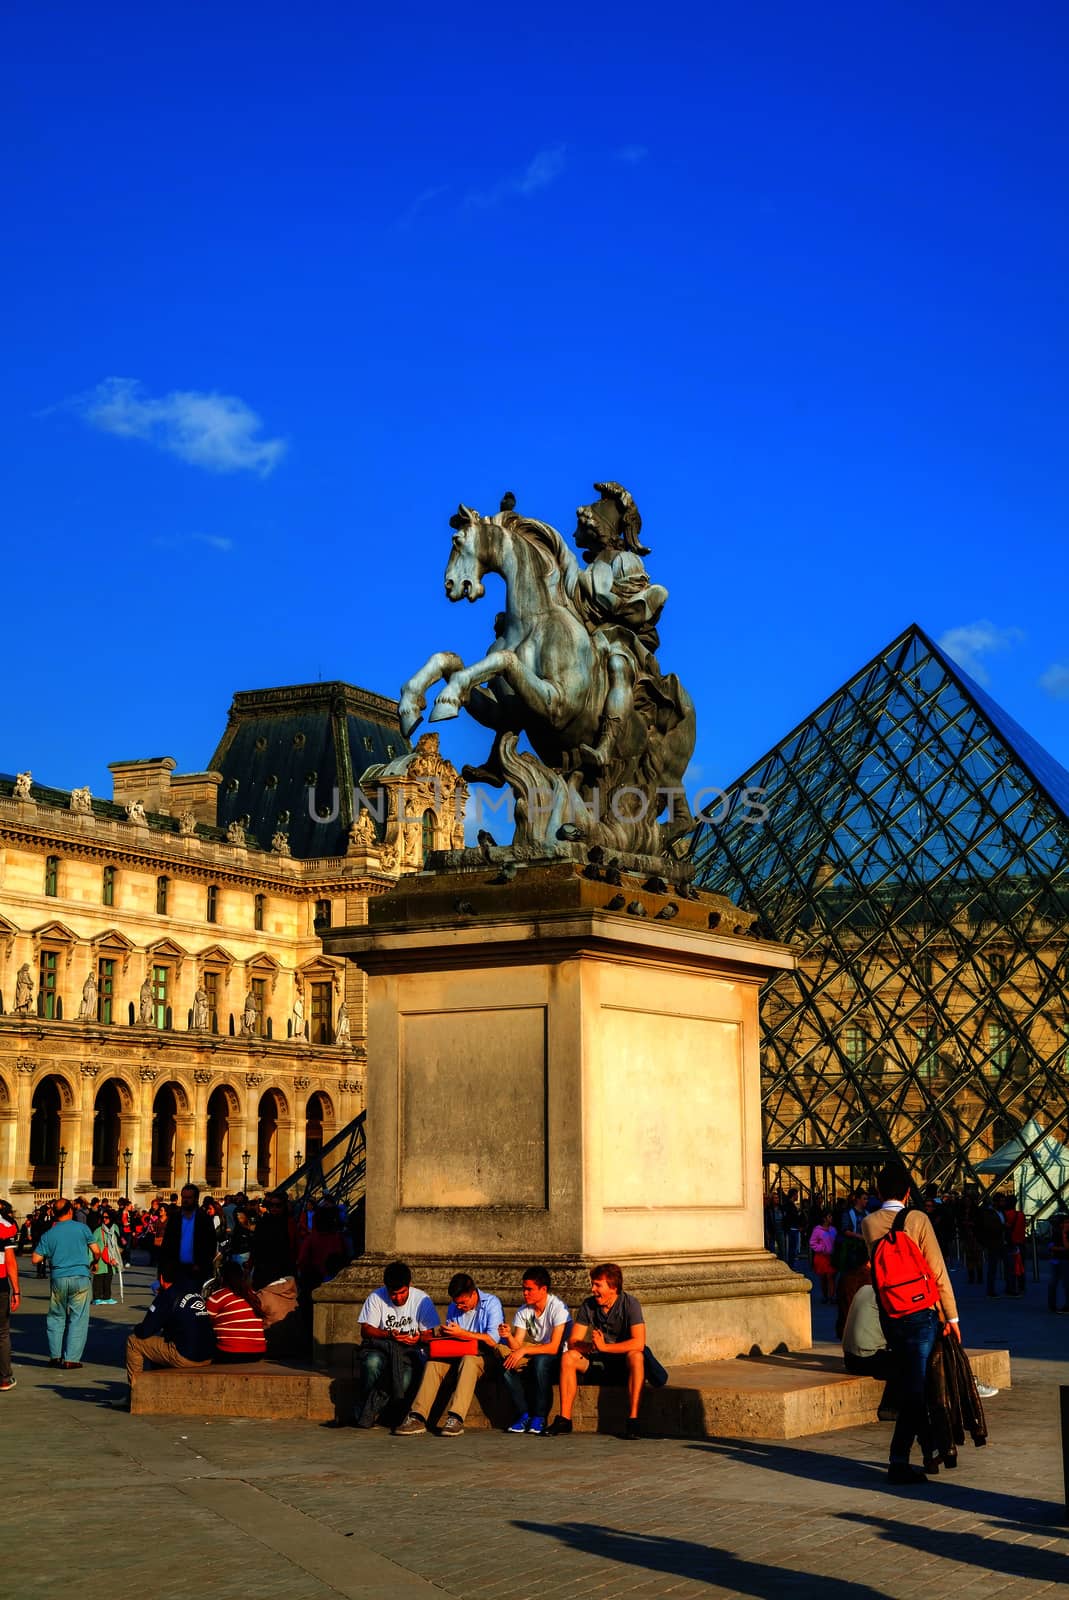  Louis XIV statue at the Louvre museum in Paris, France by AndreyKr